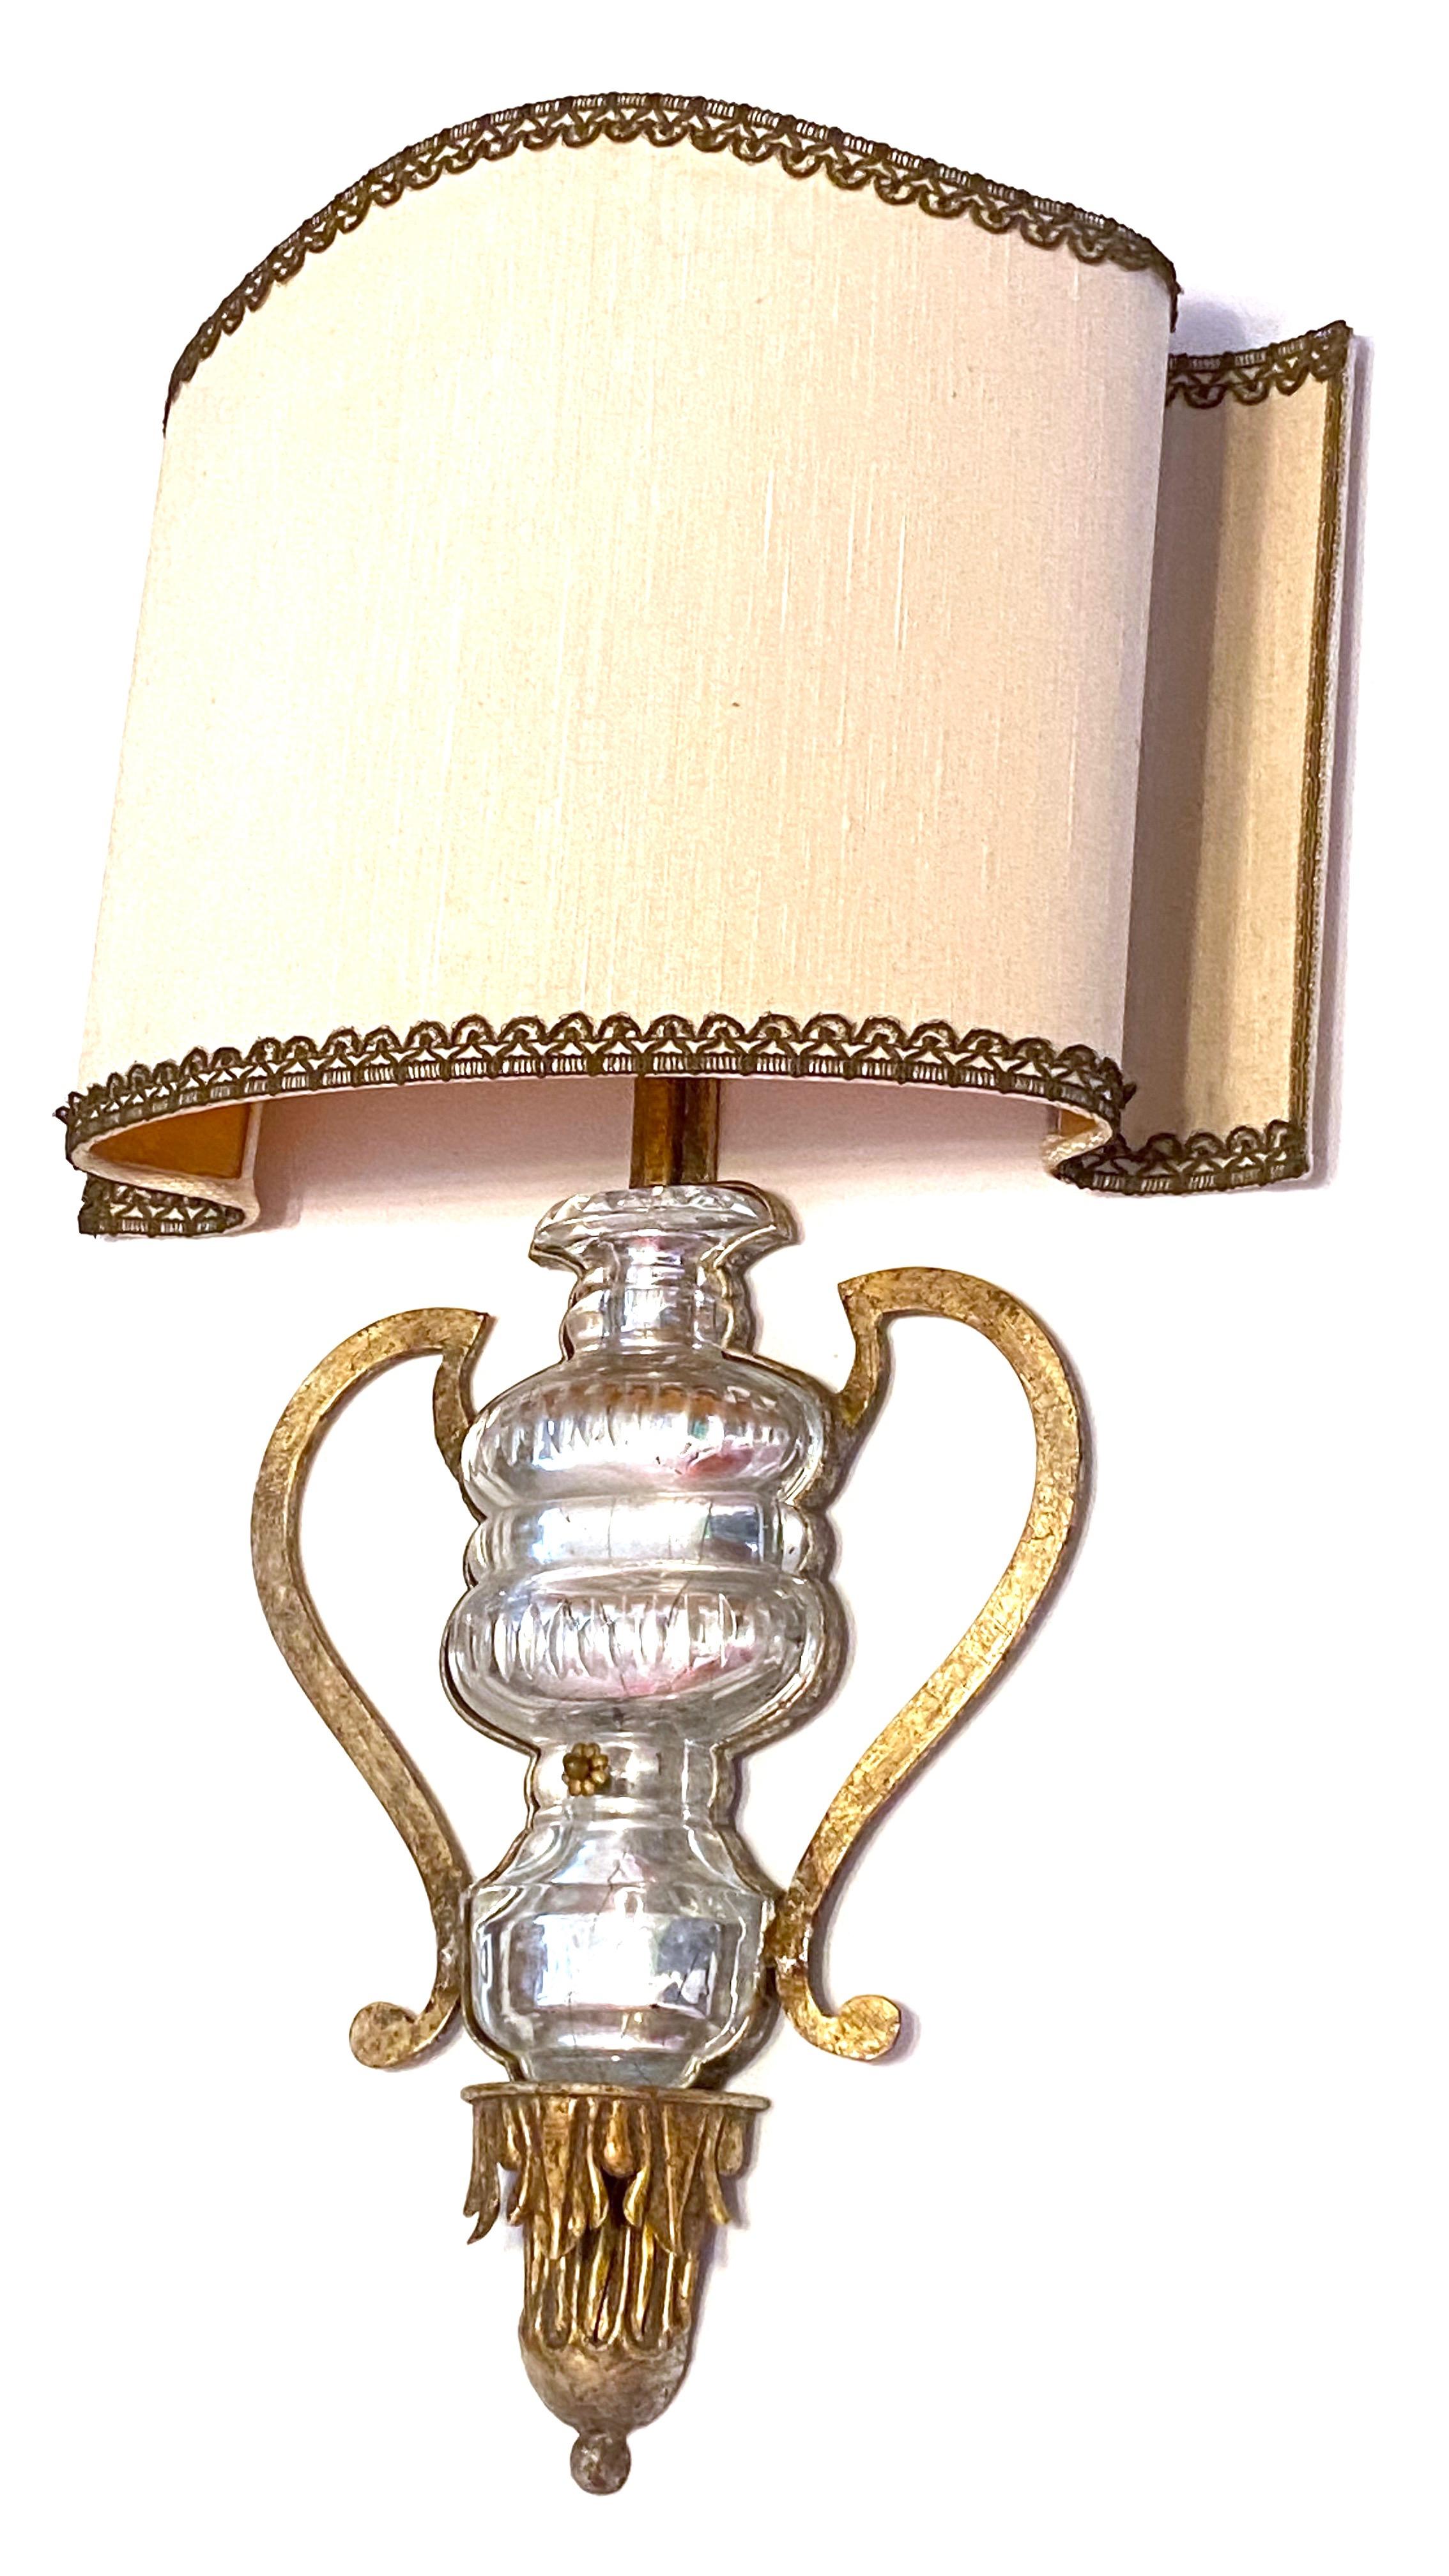 Gorgeous Monumental Italian Crystal Urn Motif Wall Sconce by Banci Florence In Good Condition For Sale In Nuernberg, DE